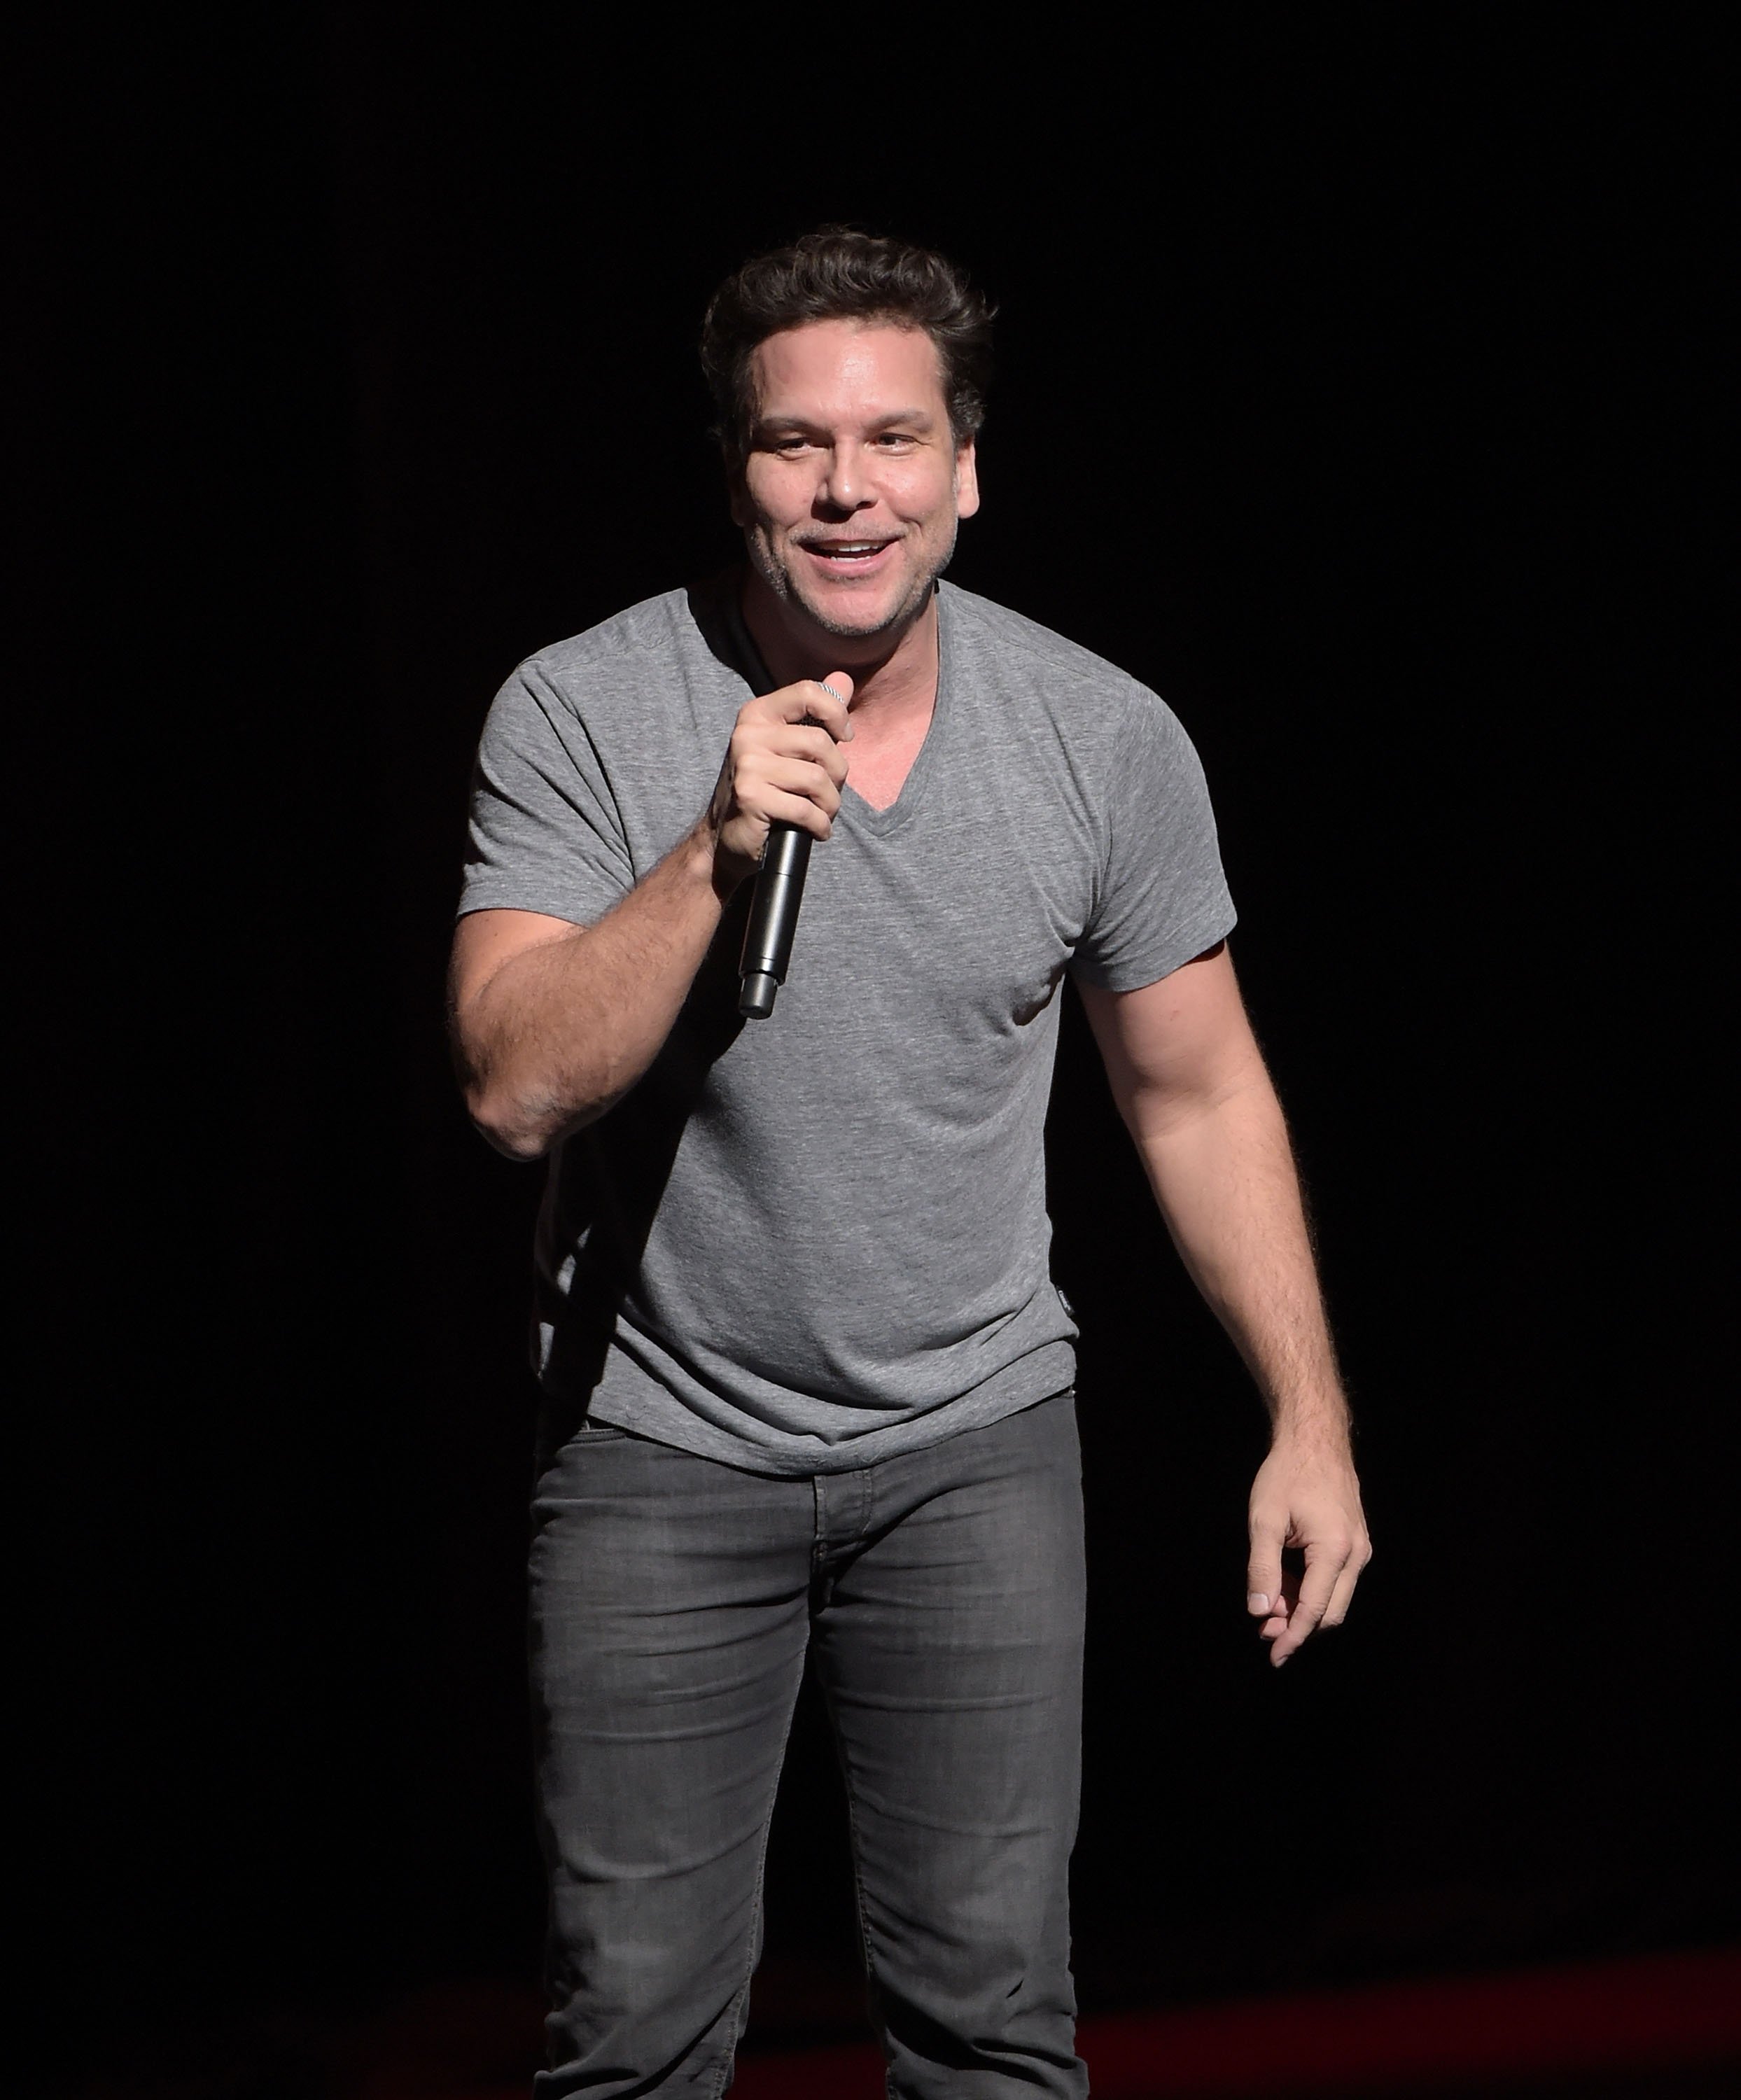 Dane Cook performing during New York Comedy Festival in New York on November 4, 2016 | Source: Getty Images 